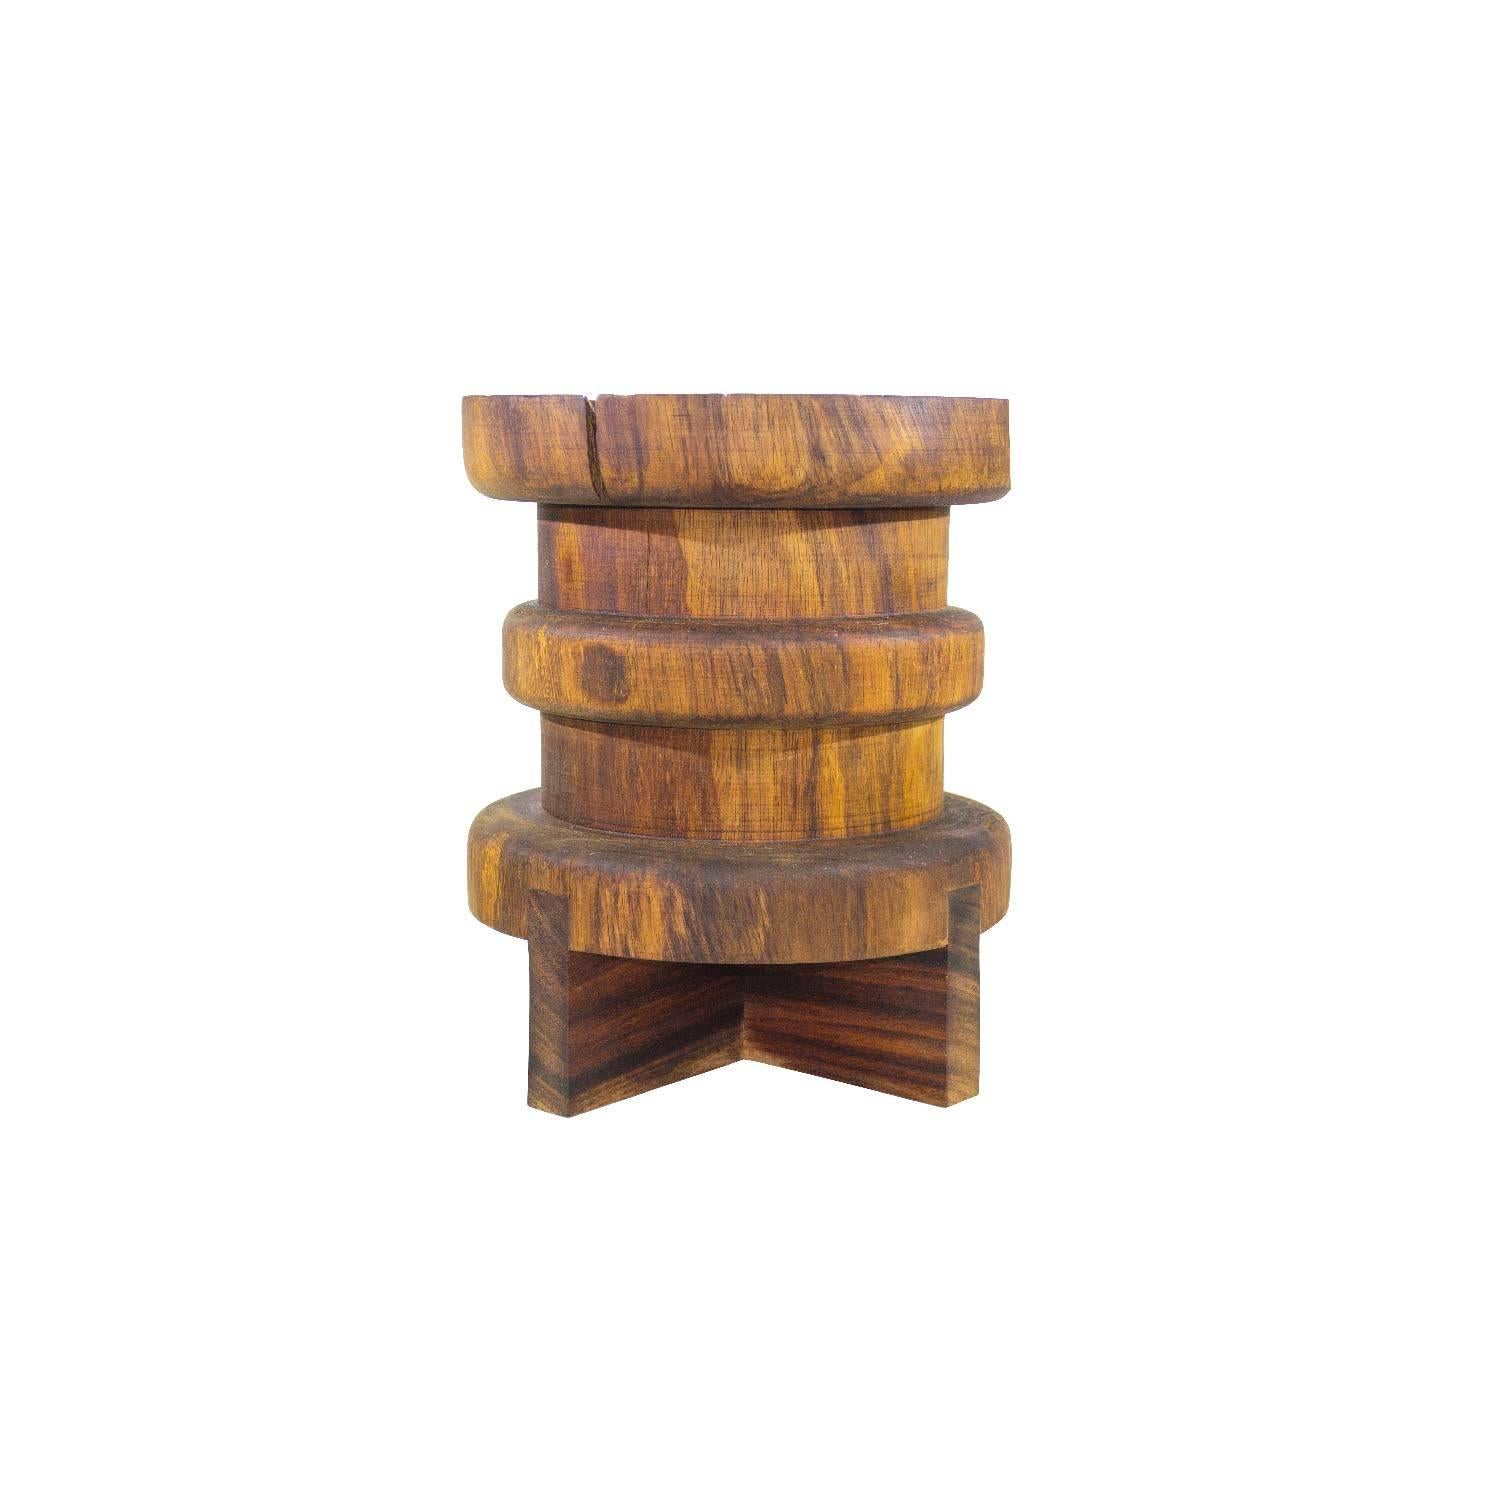 This contemporary table body is made out of a single turned tree trunk, with natural finish.